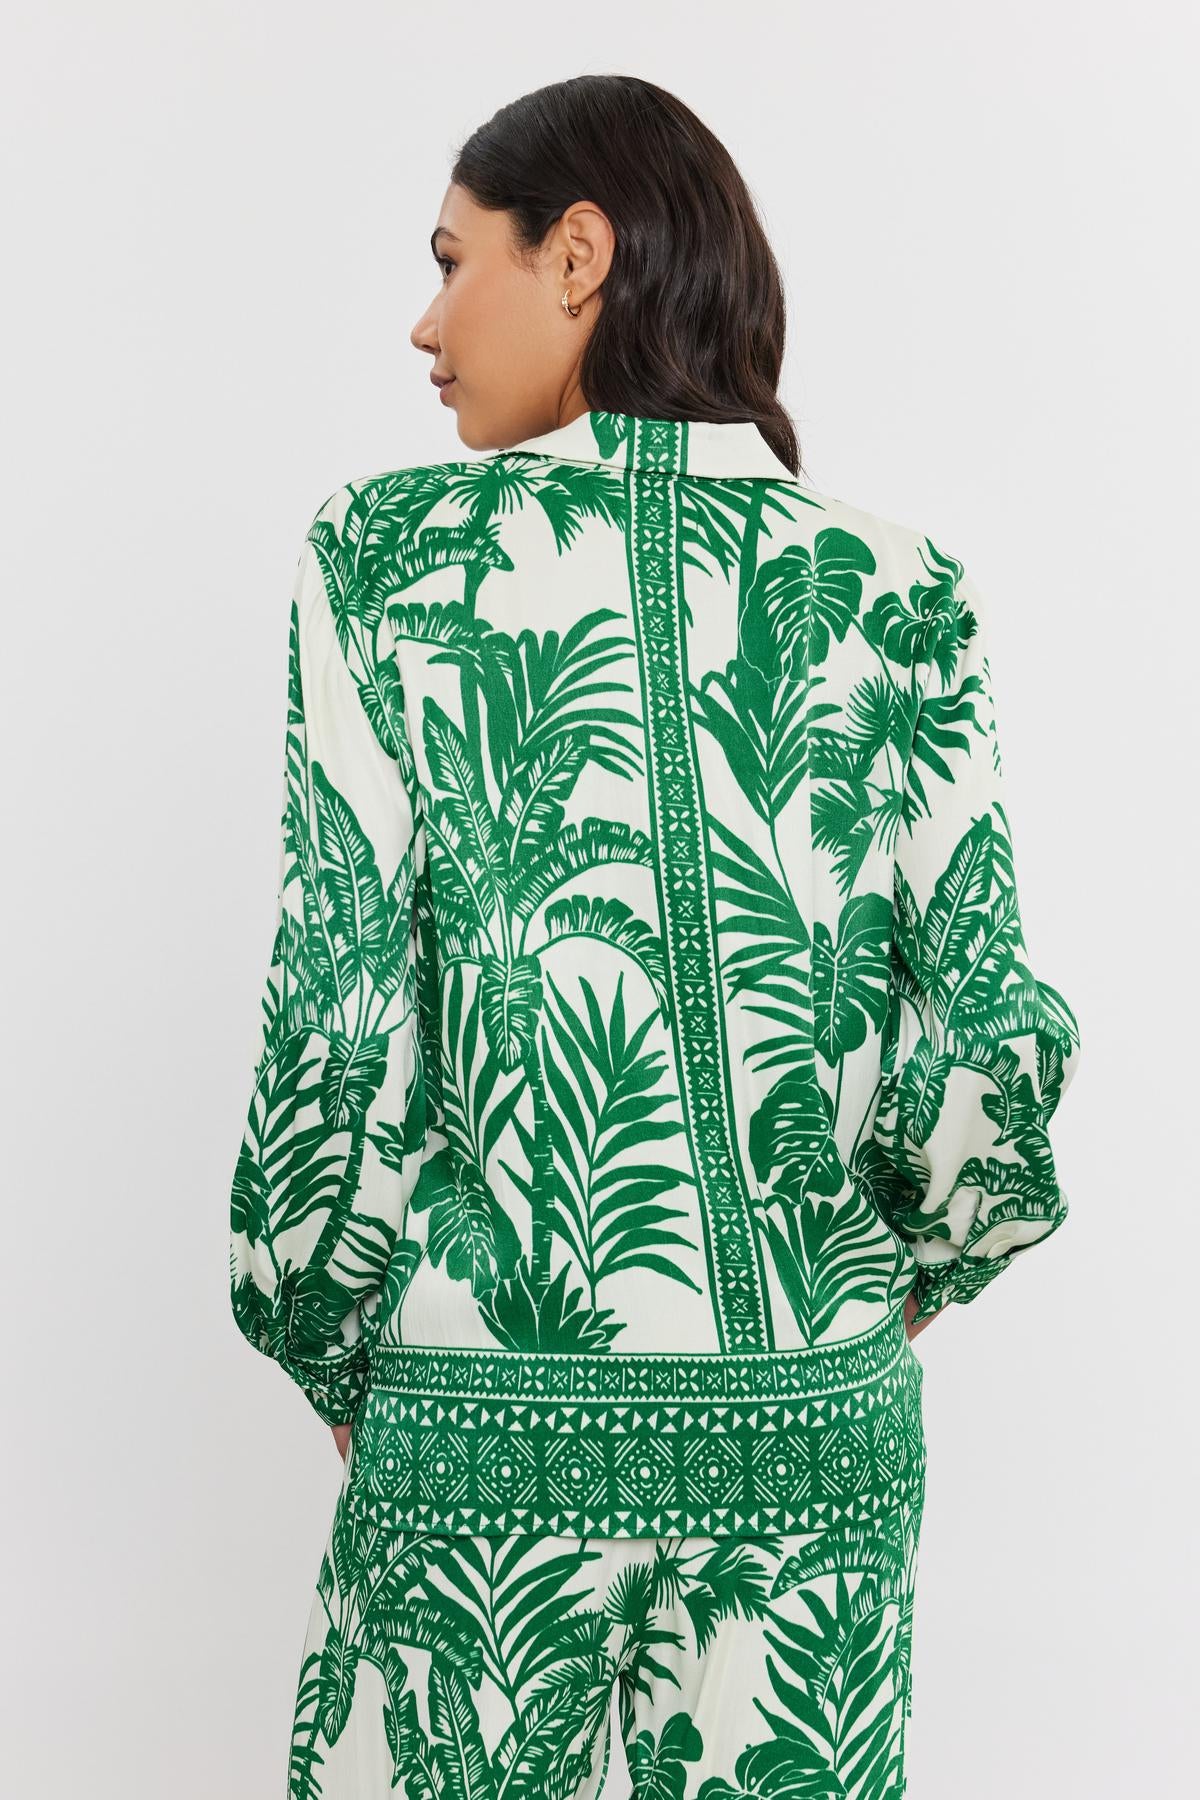   Woman seen from the back wearing a white and green palm print AYLA BUTTON-UP SHIRT with long sleeves, standing against a plain background. Brand name: Velvet by Graham & Spencer 